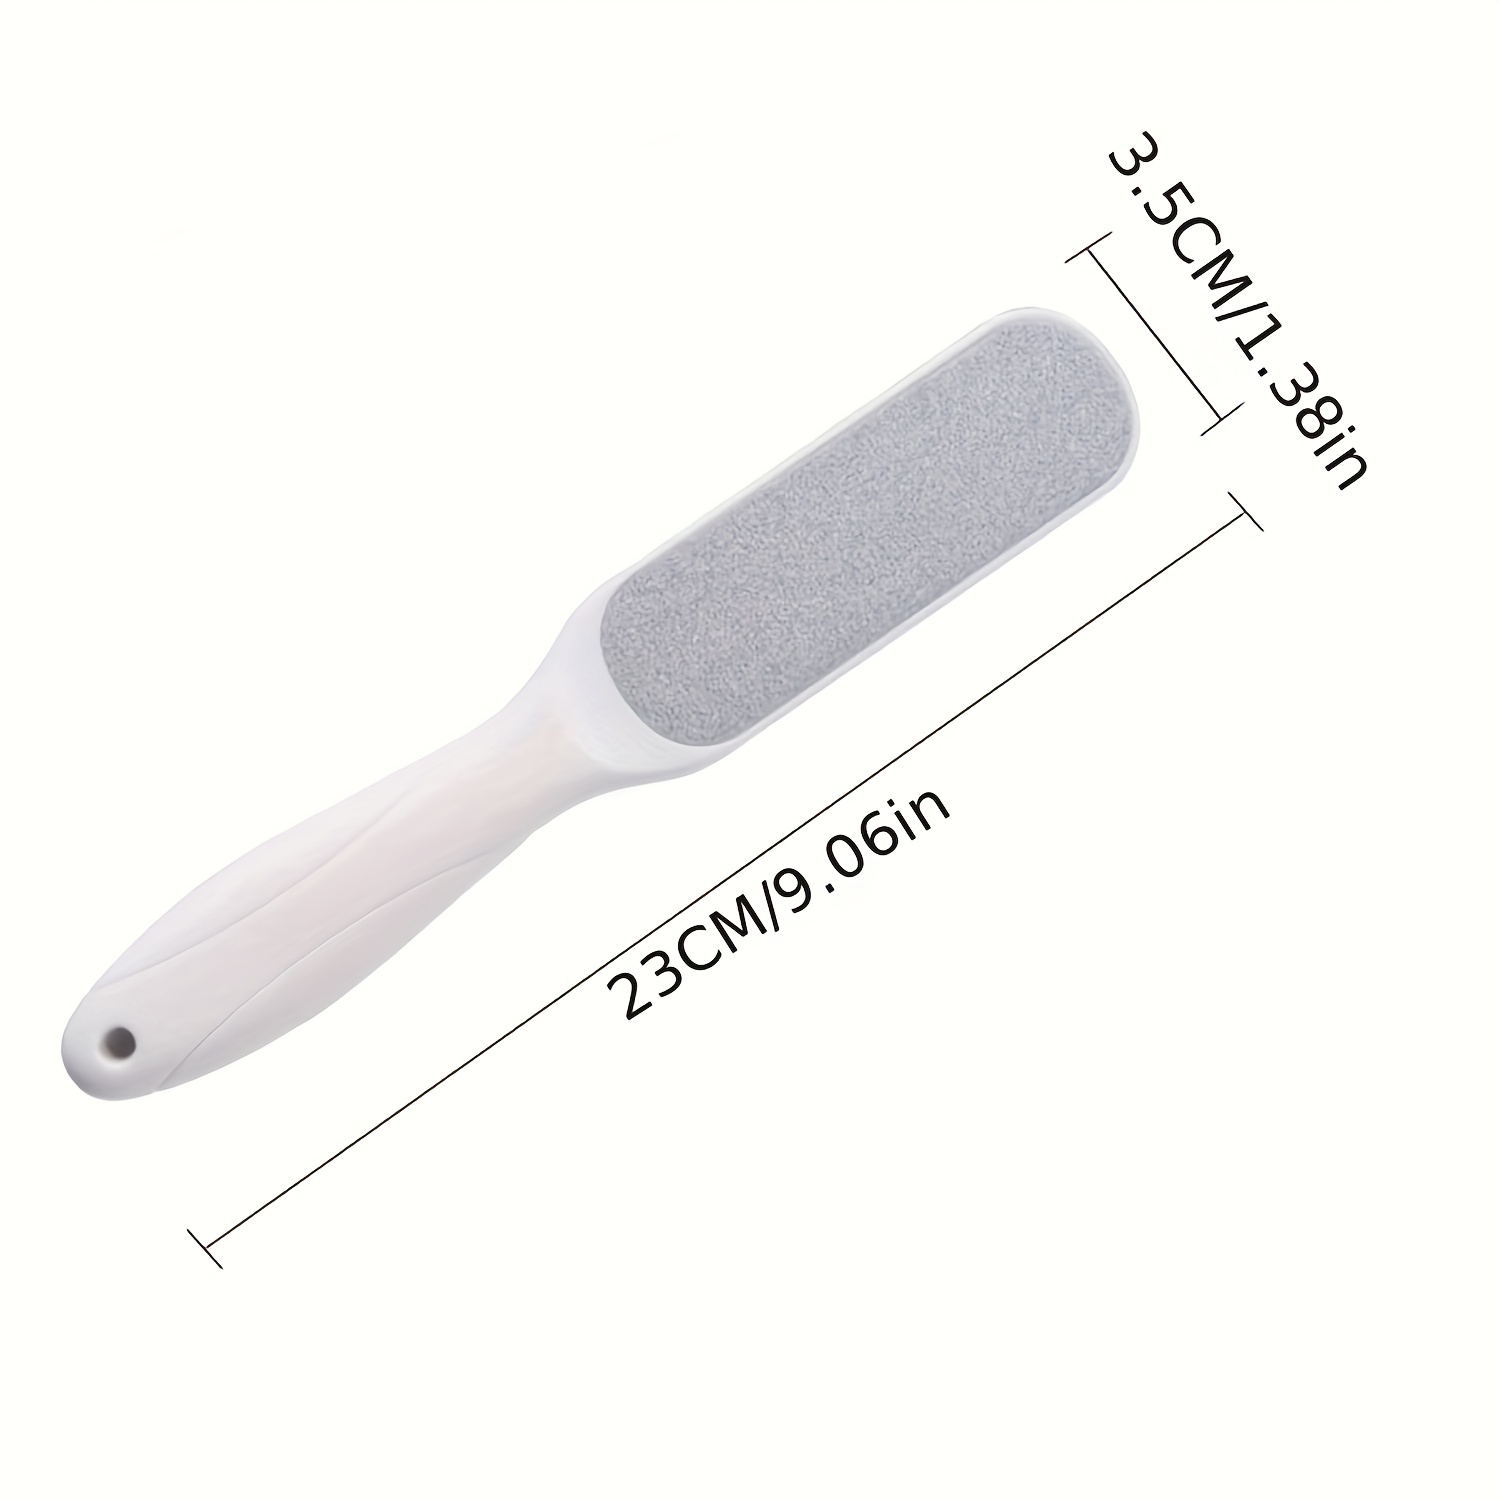  Colossal Foot rasp Foot File and Callus Remover. Best Foot  Care Pedicure Metal Surface Tool to Remove Hard Skin. Can be Used on Both  Wet and Dry feet, Surgical Grade